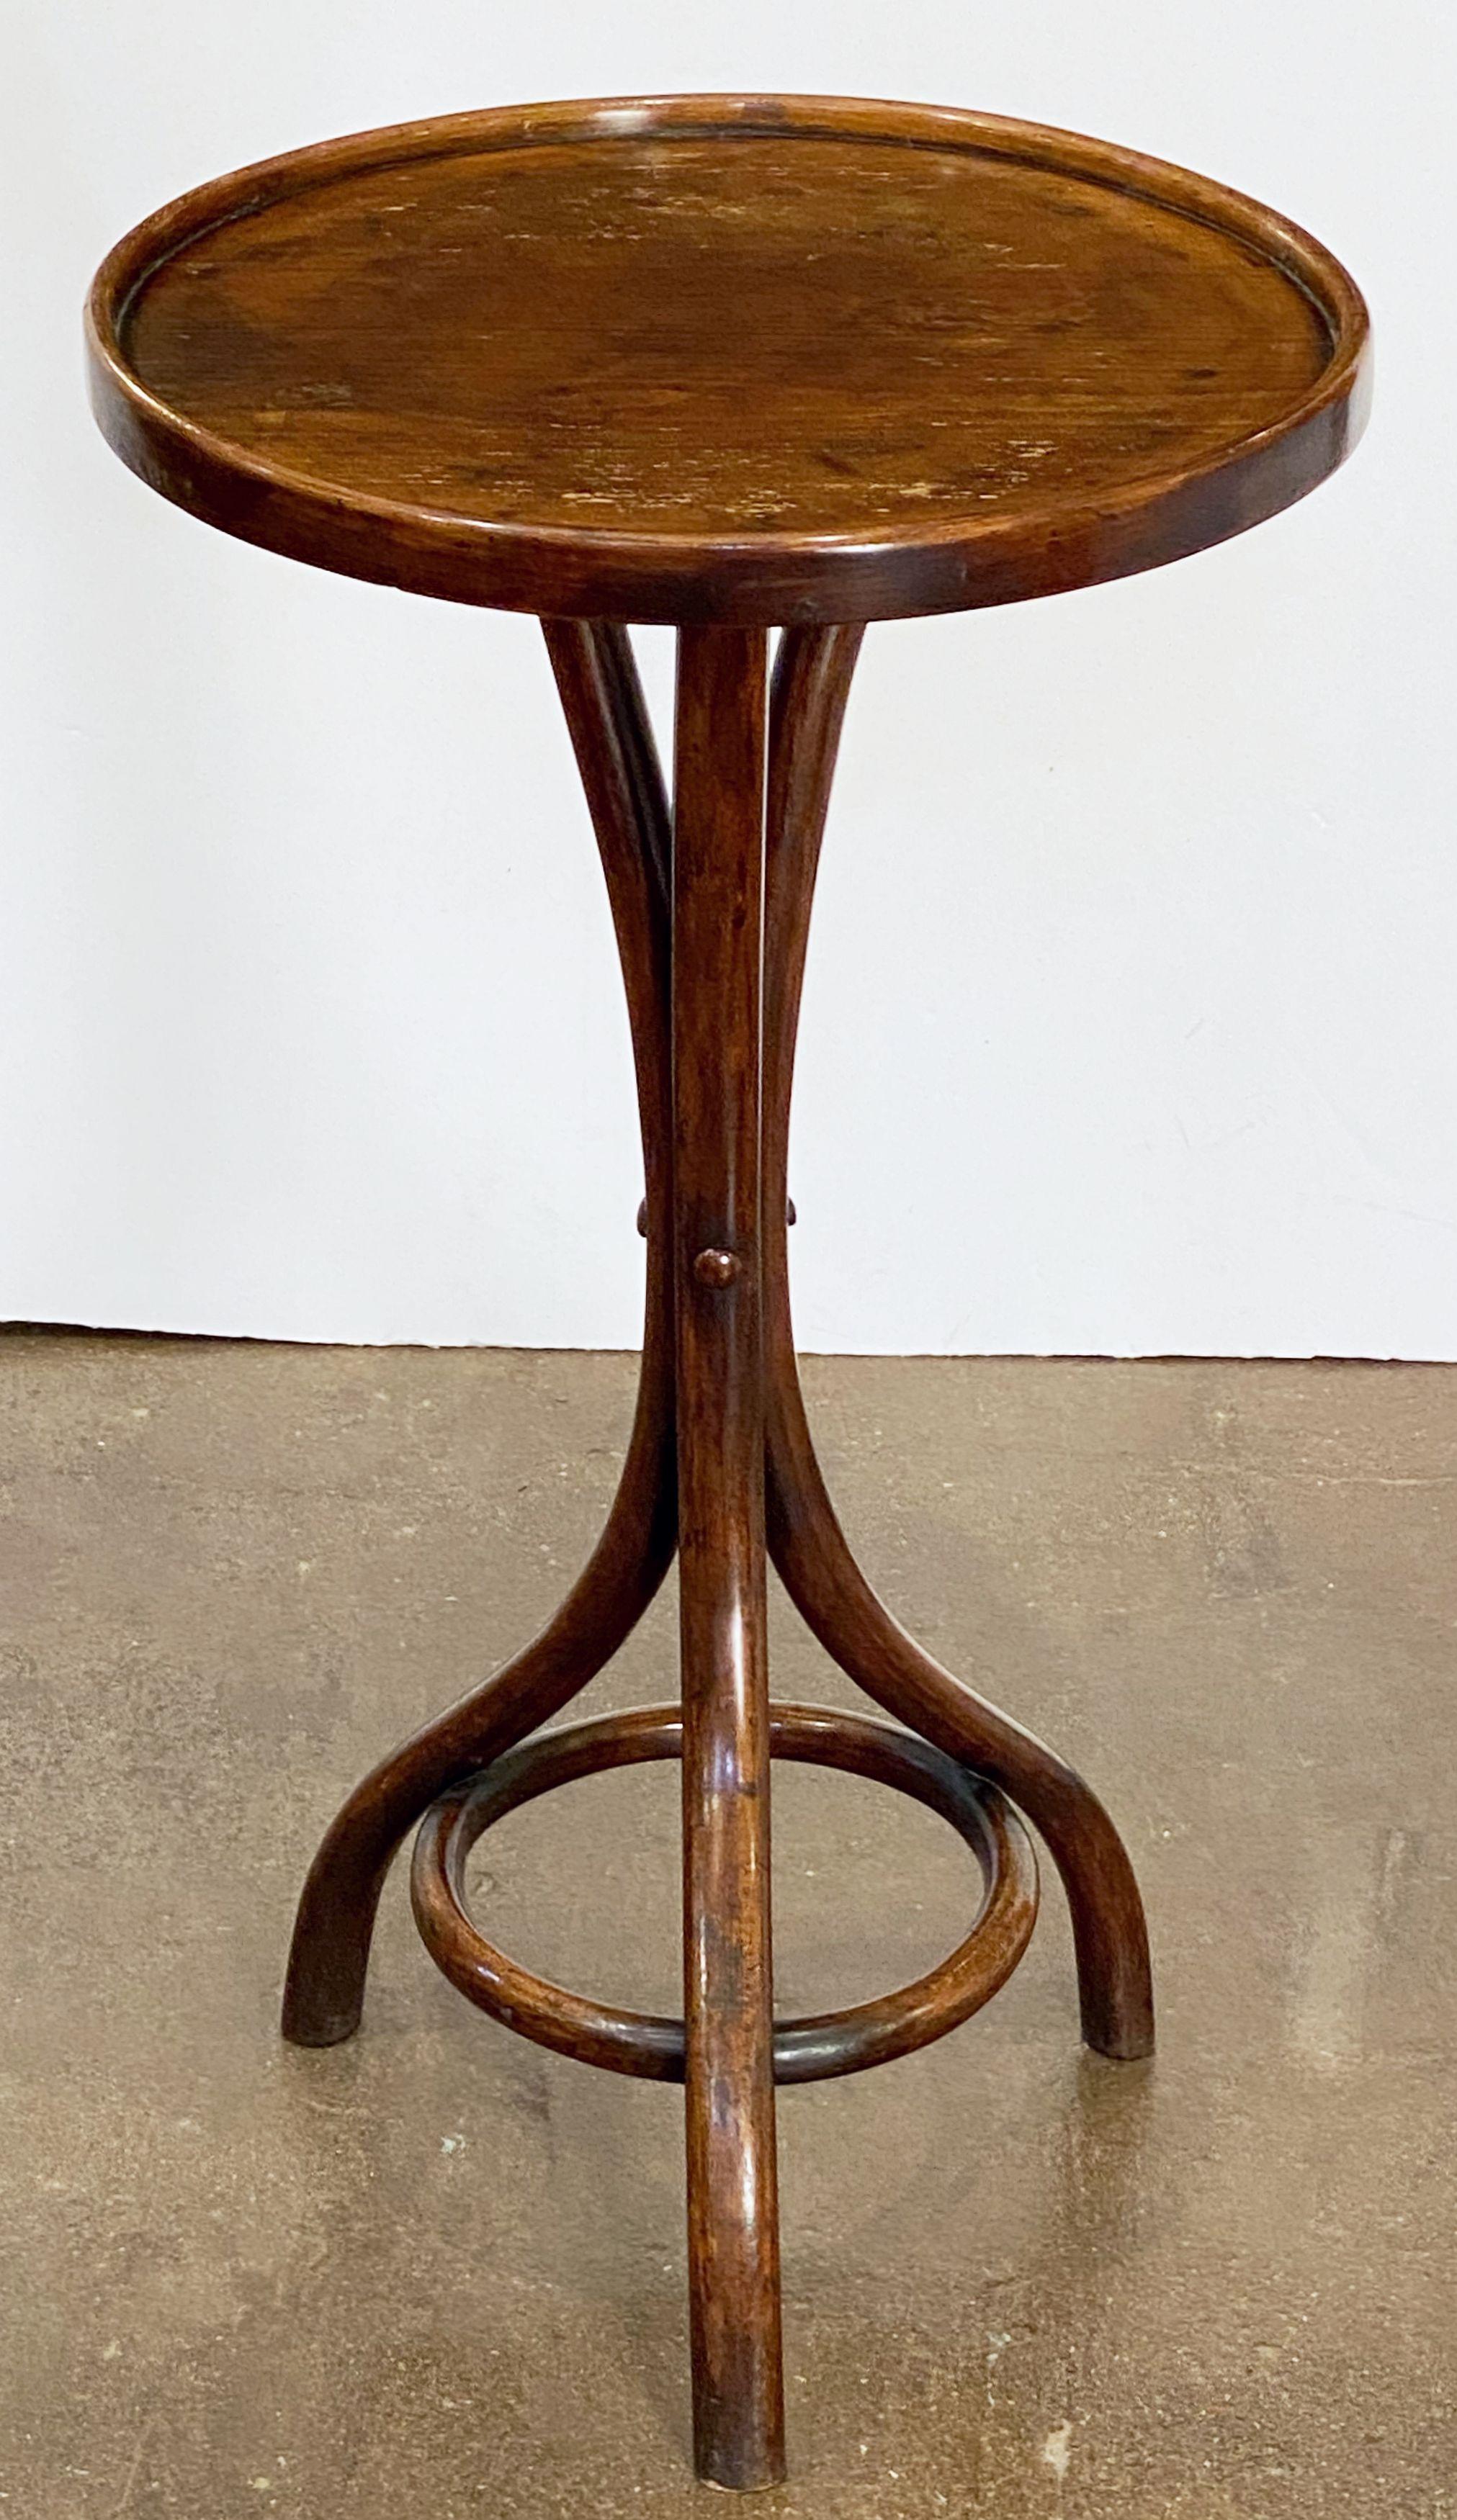 A fine French bentwood cafe or bistro table featuring a round or circular moulded top over a stylish bentwood tripod frame.